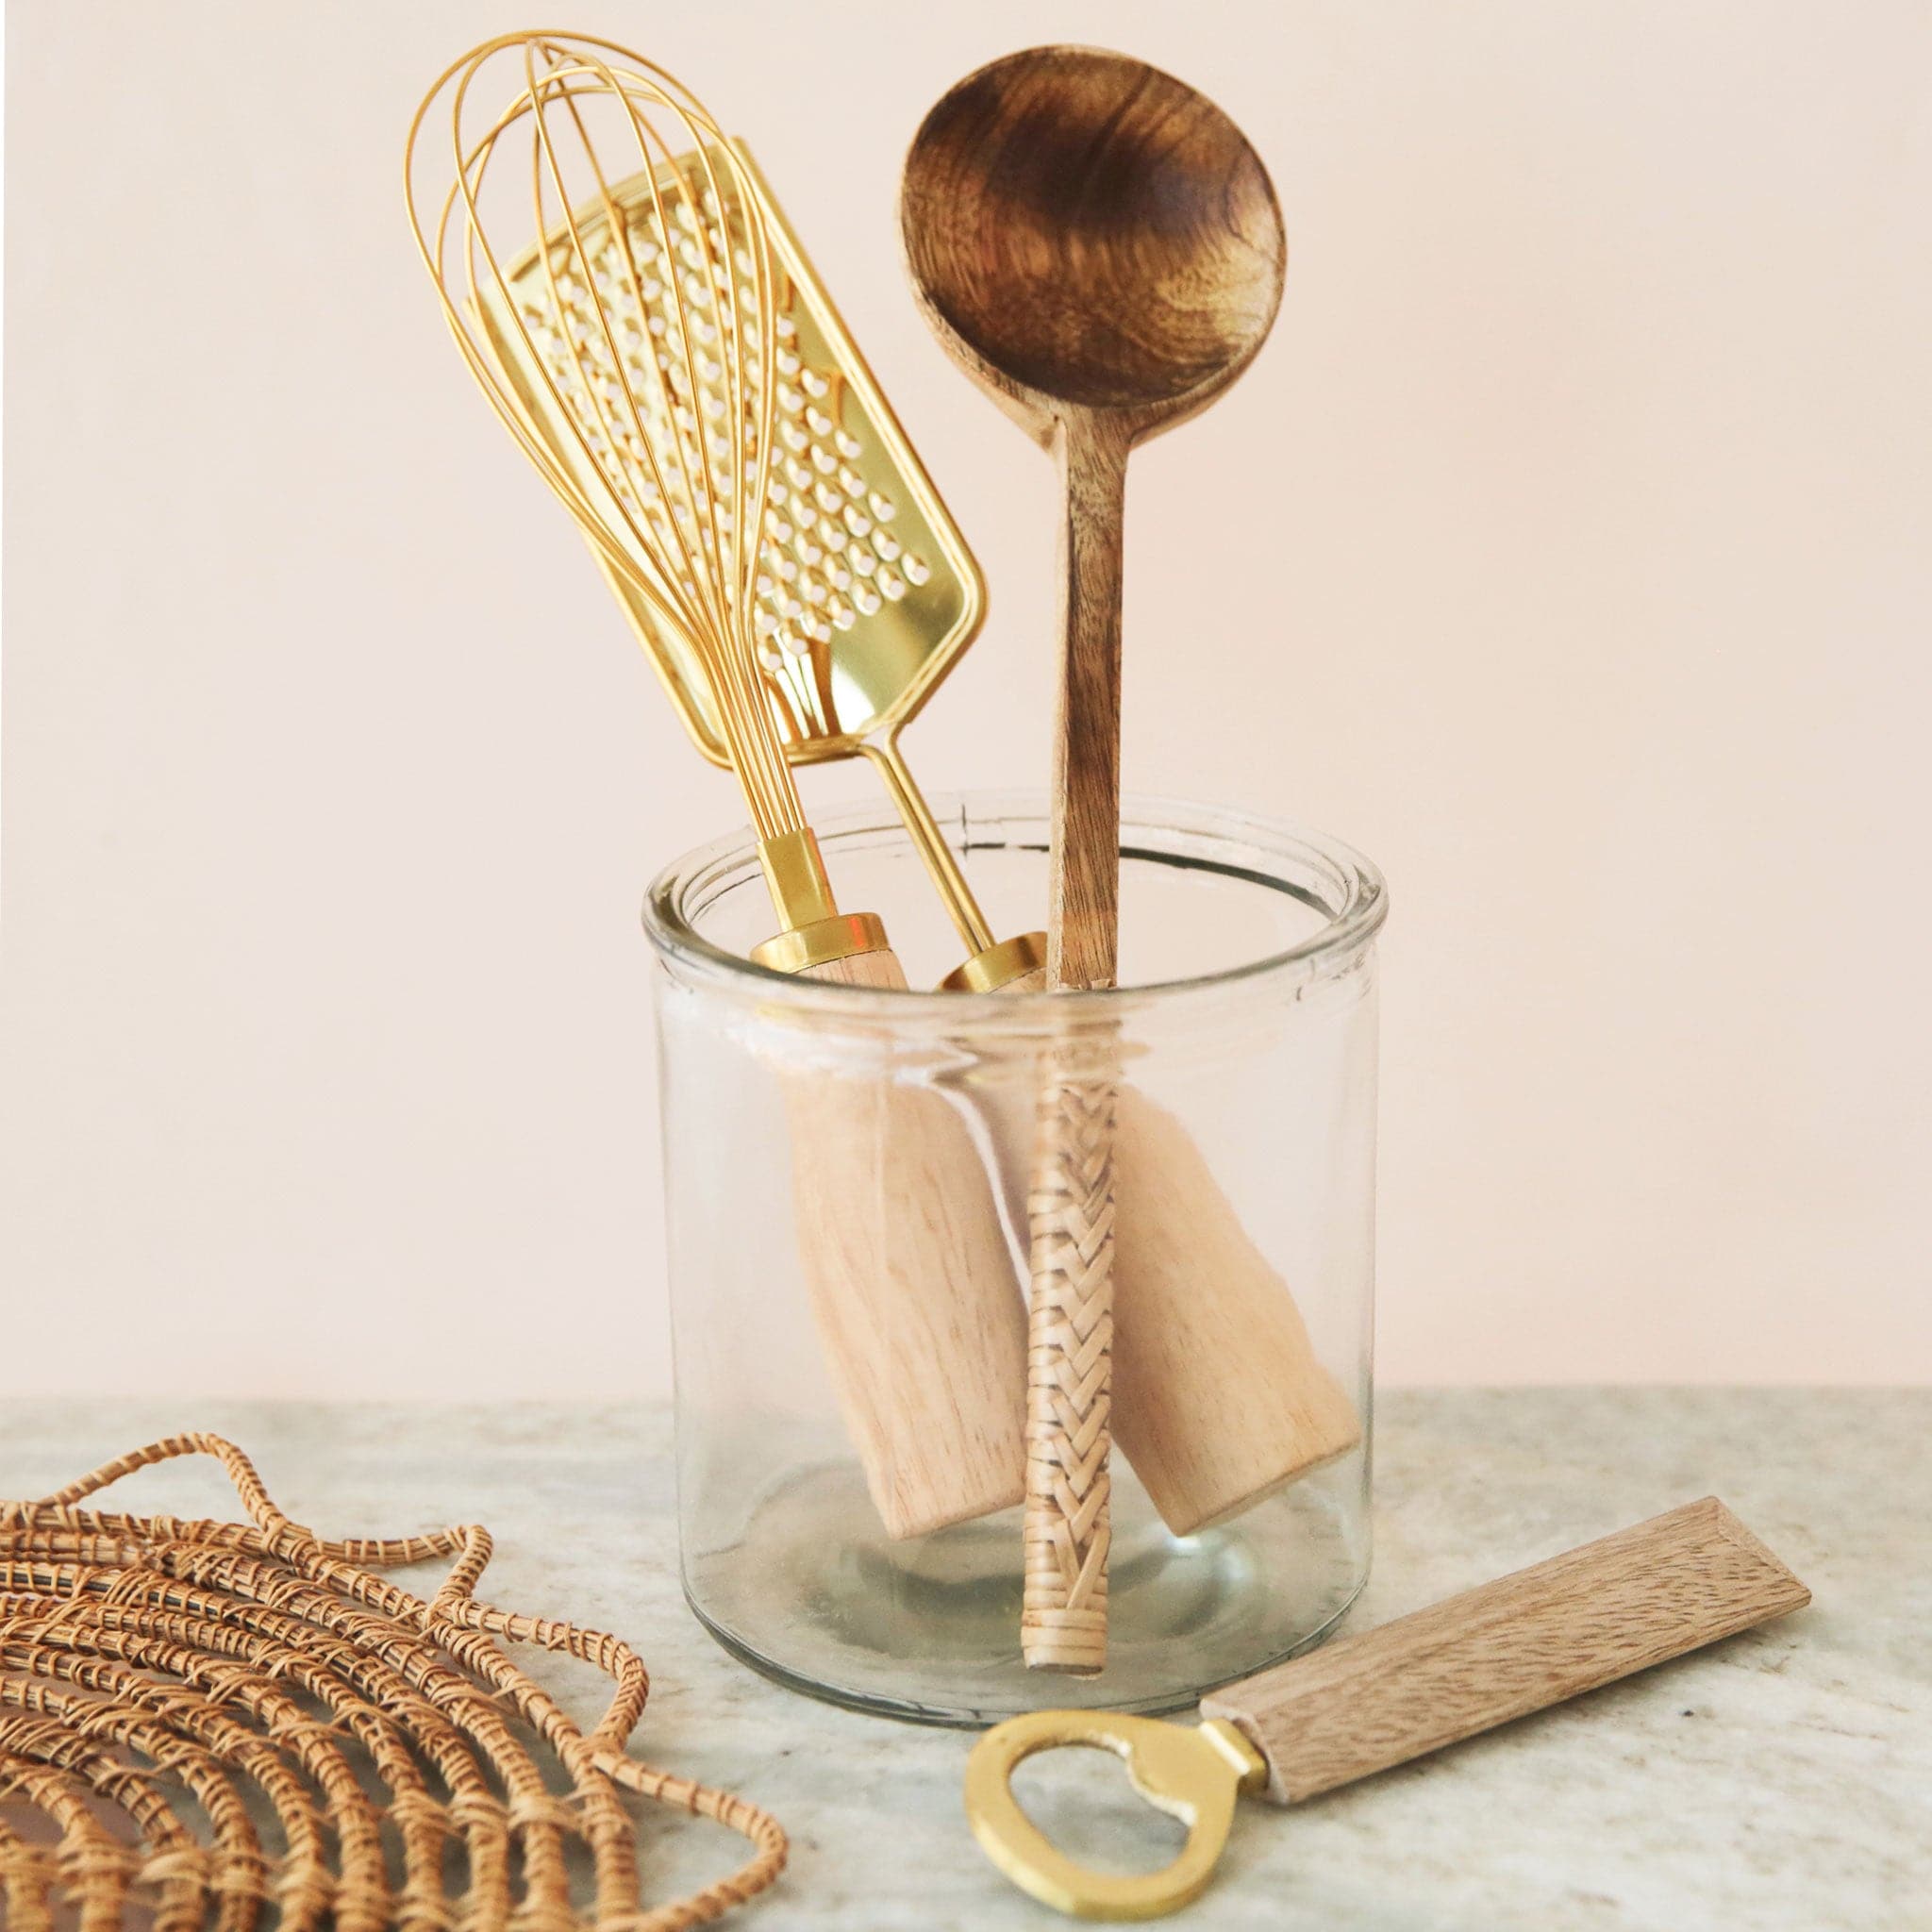 On a white background is a gold whisk with a wood handle photographed with other kitchen tools. 